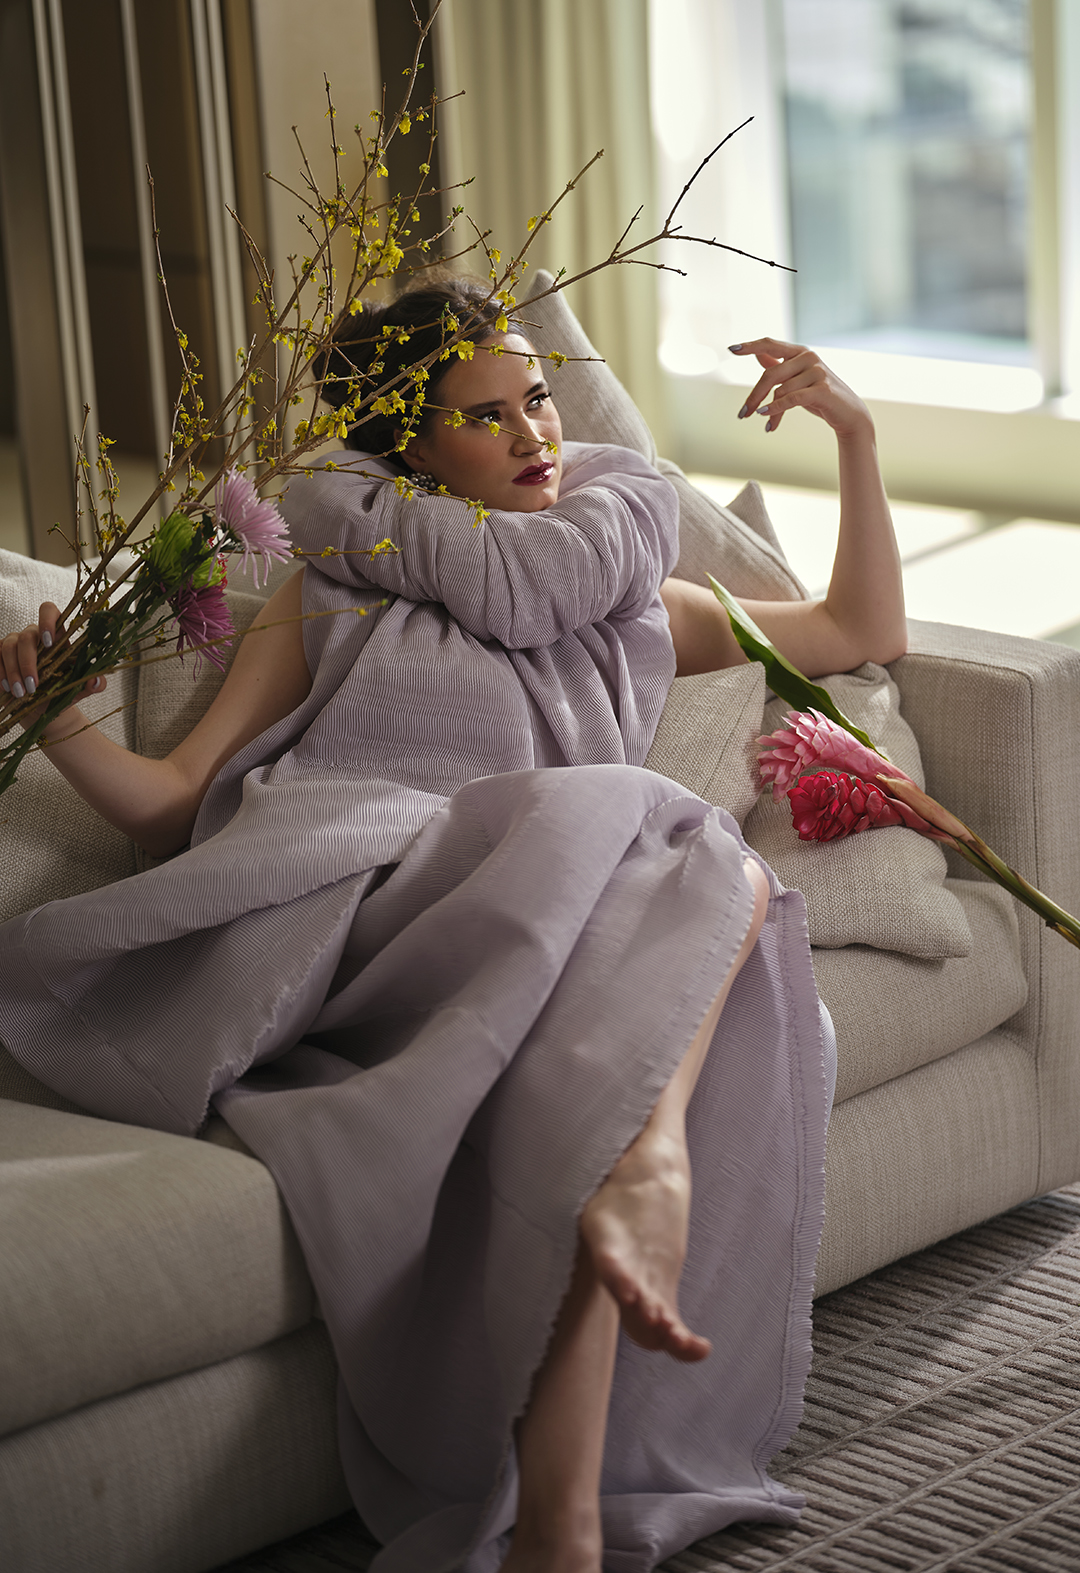 A female model in a purple pleated balloon dress with a train and a separate puffy collar is sitting down on a couch, with her left arm raised at a 90-degree angle and her right arm open to the side. In her right she is holding purple and pink and green flowers and branches with small yellow flowers. There is a big pink flower with a big green leaf lying on the couch on the model’s right side.There are multiple cushions behind her back to help her sit straight. The pleated fabric allows unique folds on the garment when sitting down.